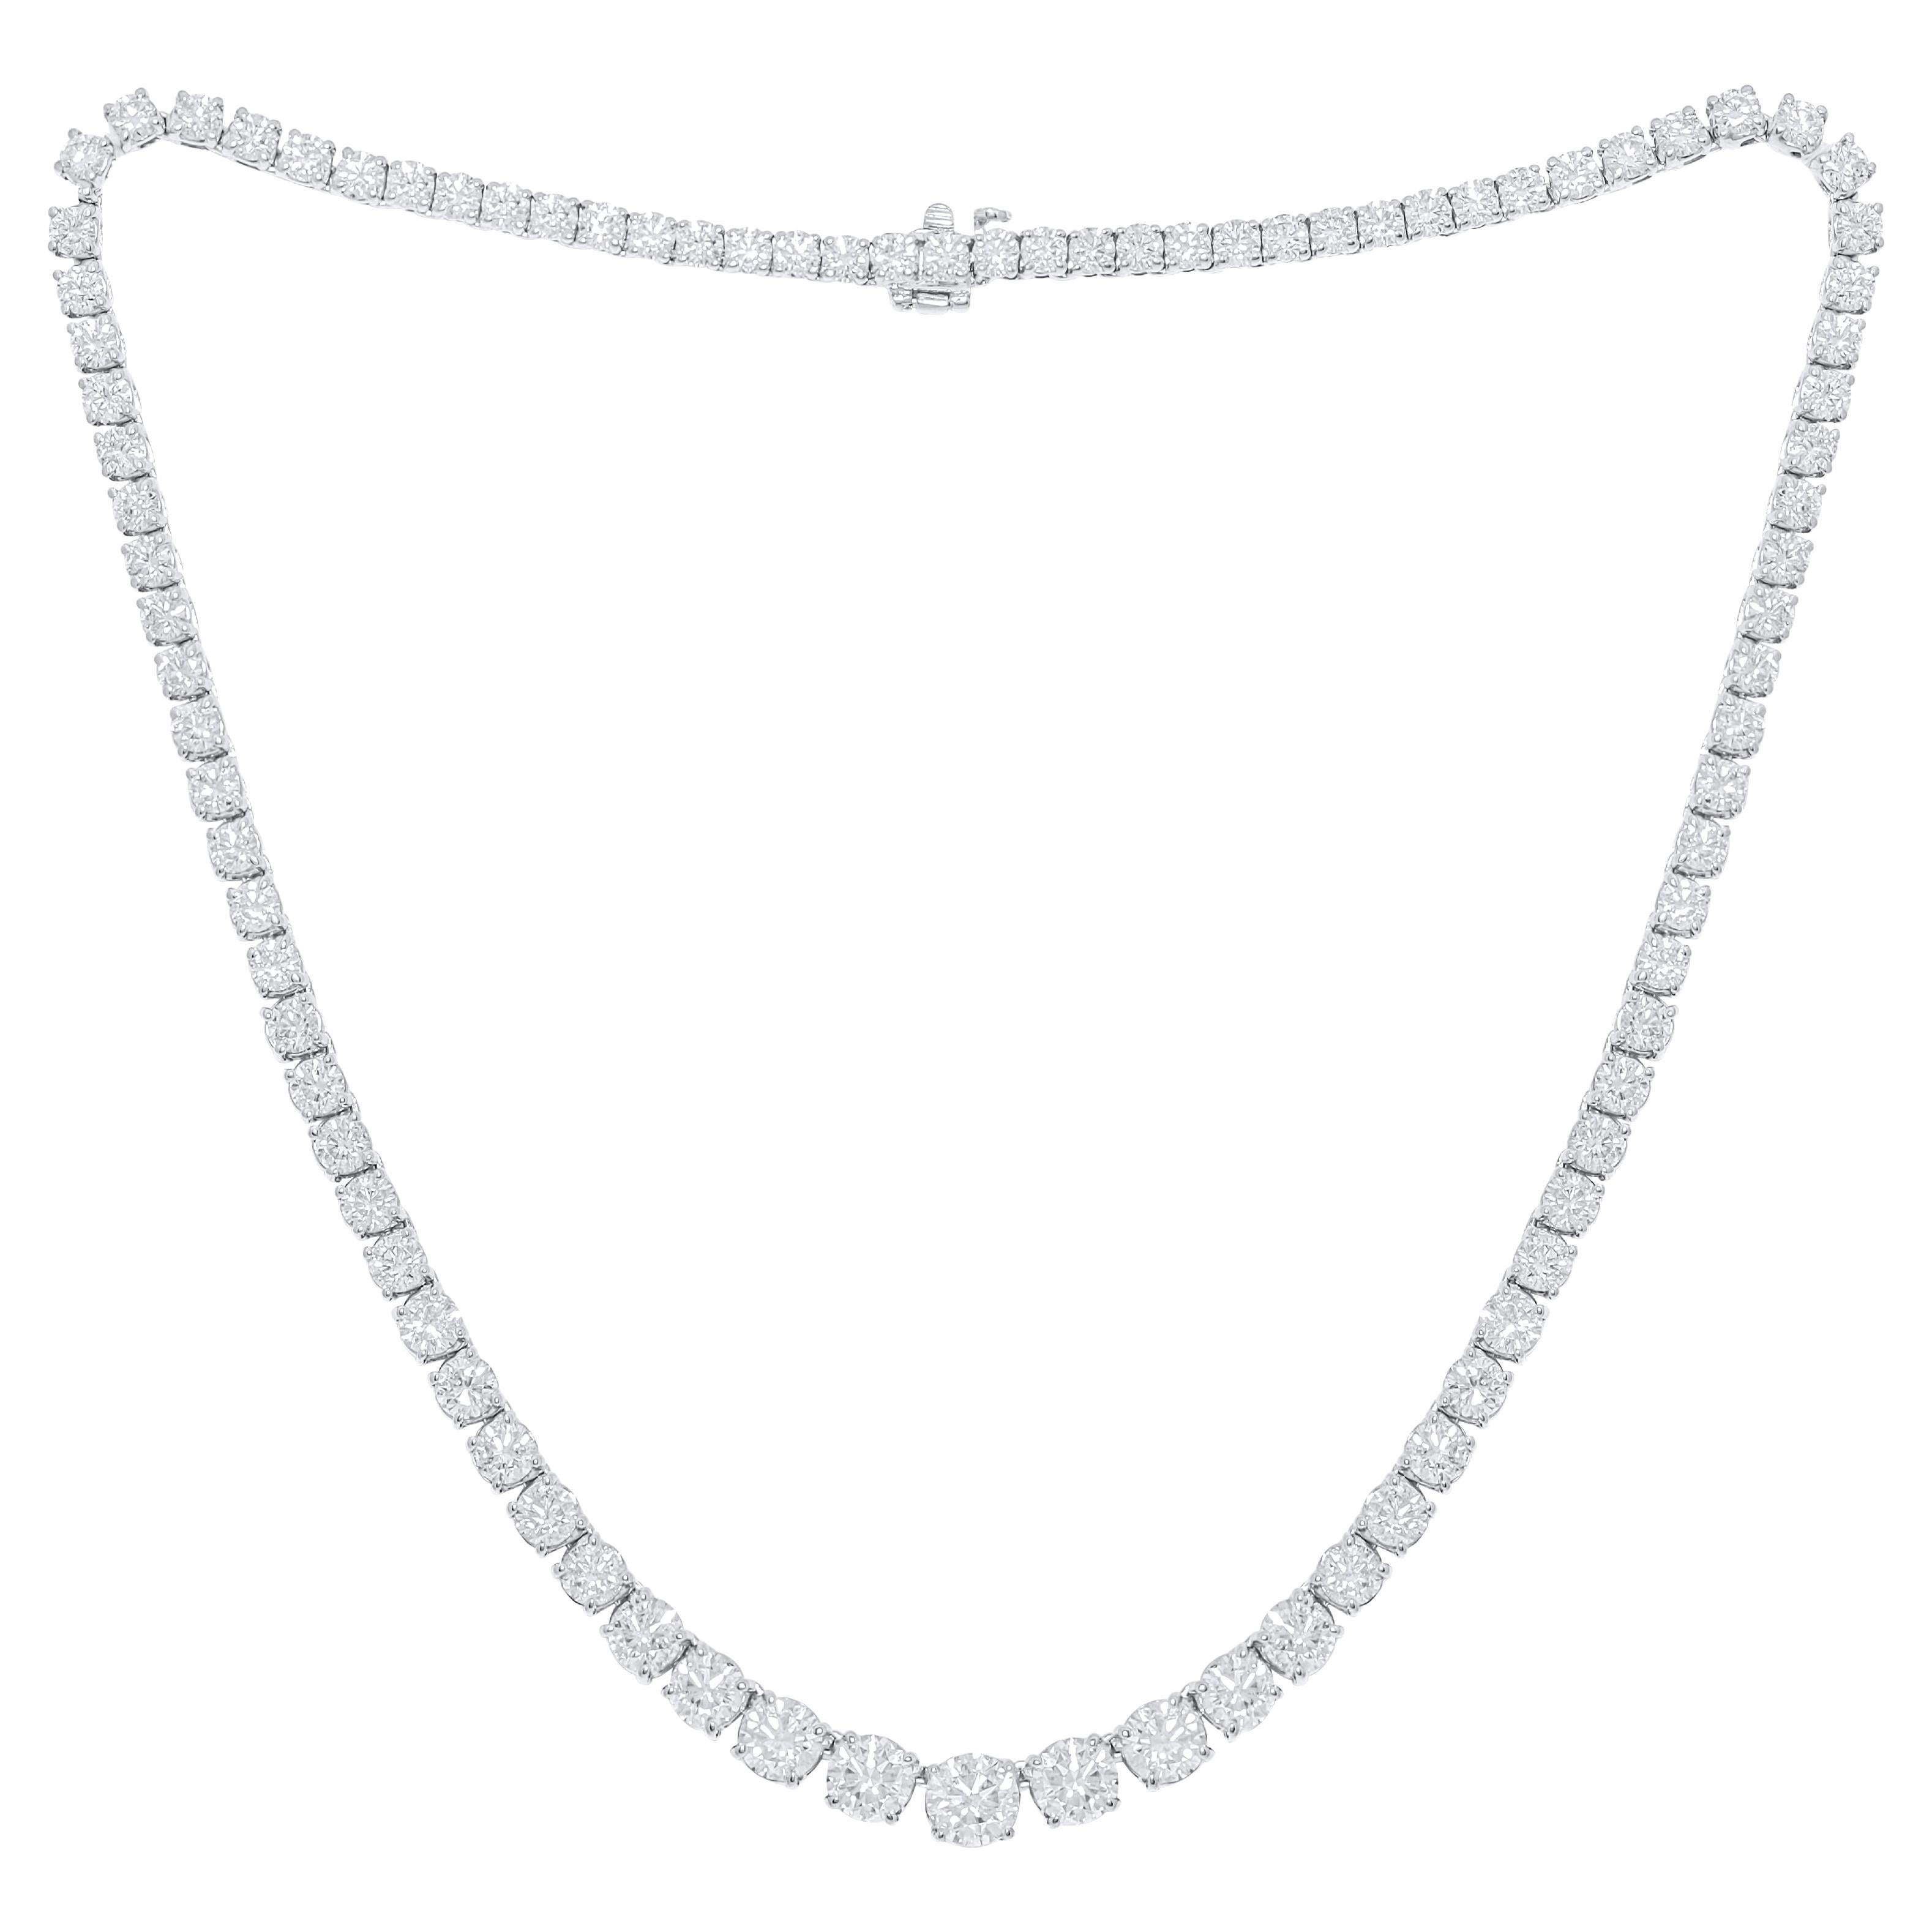 Diana M. Custom 20.05 cts Round 4 Prong Diamond 18k White Gold Tennis Necklace  For Sale